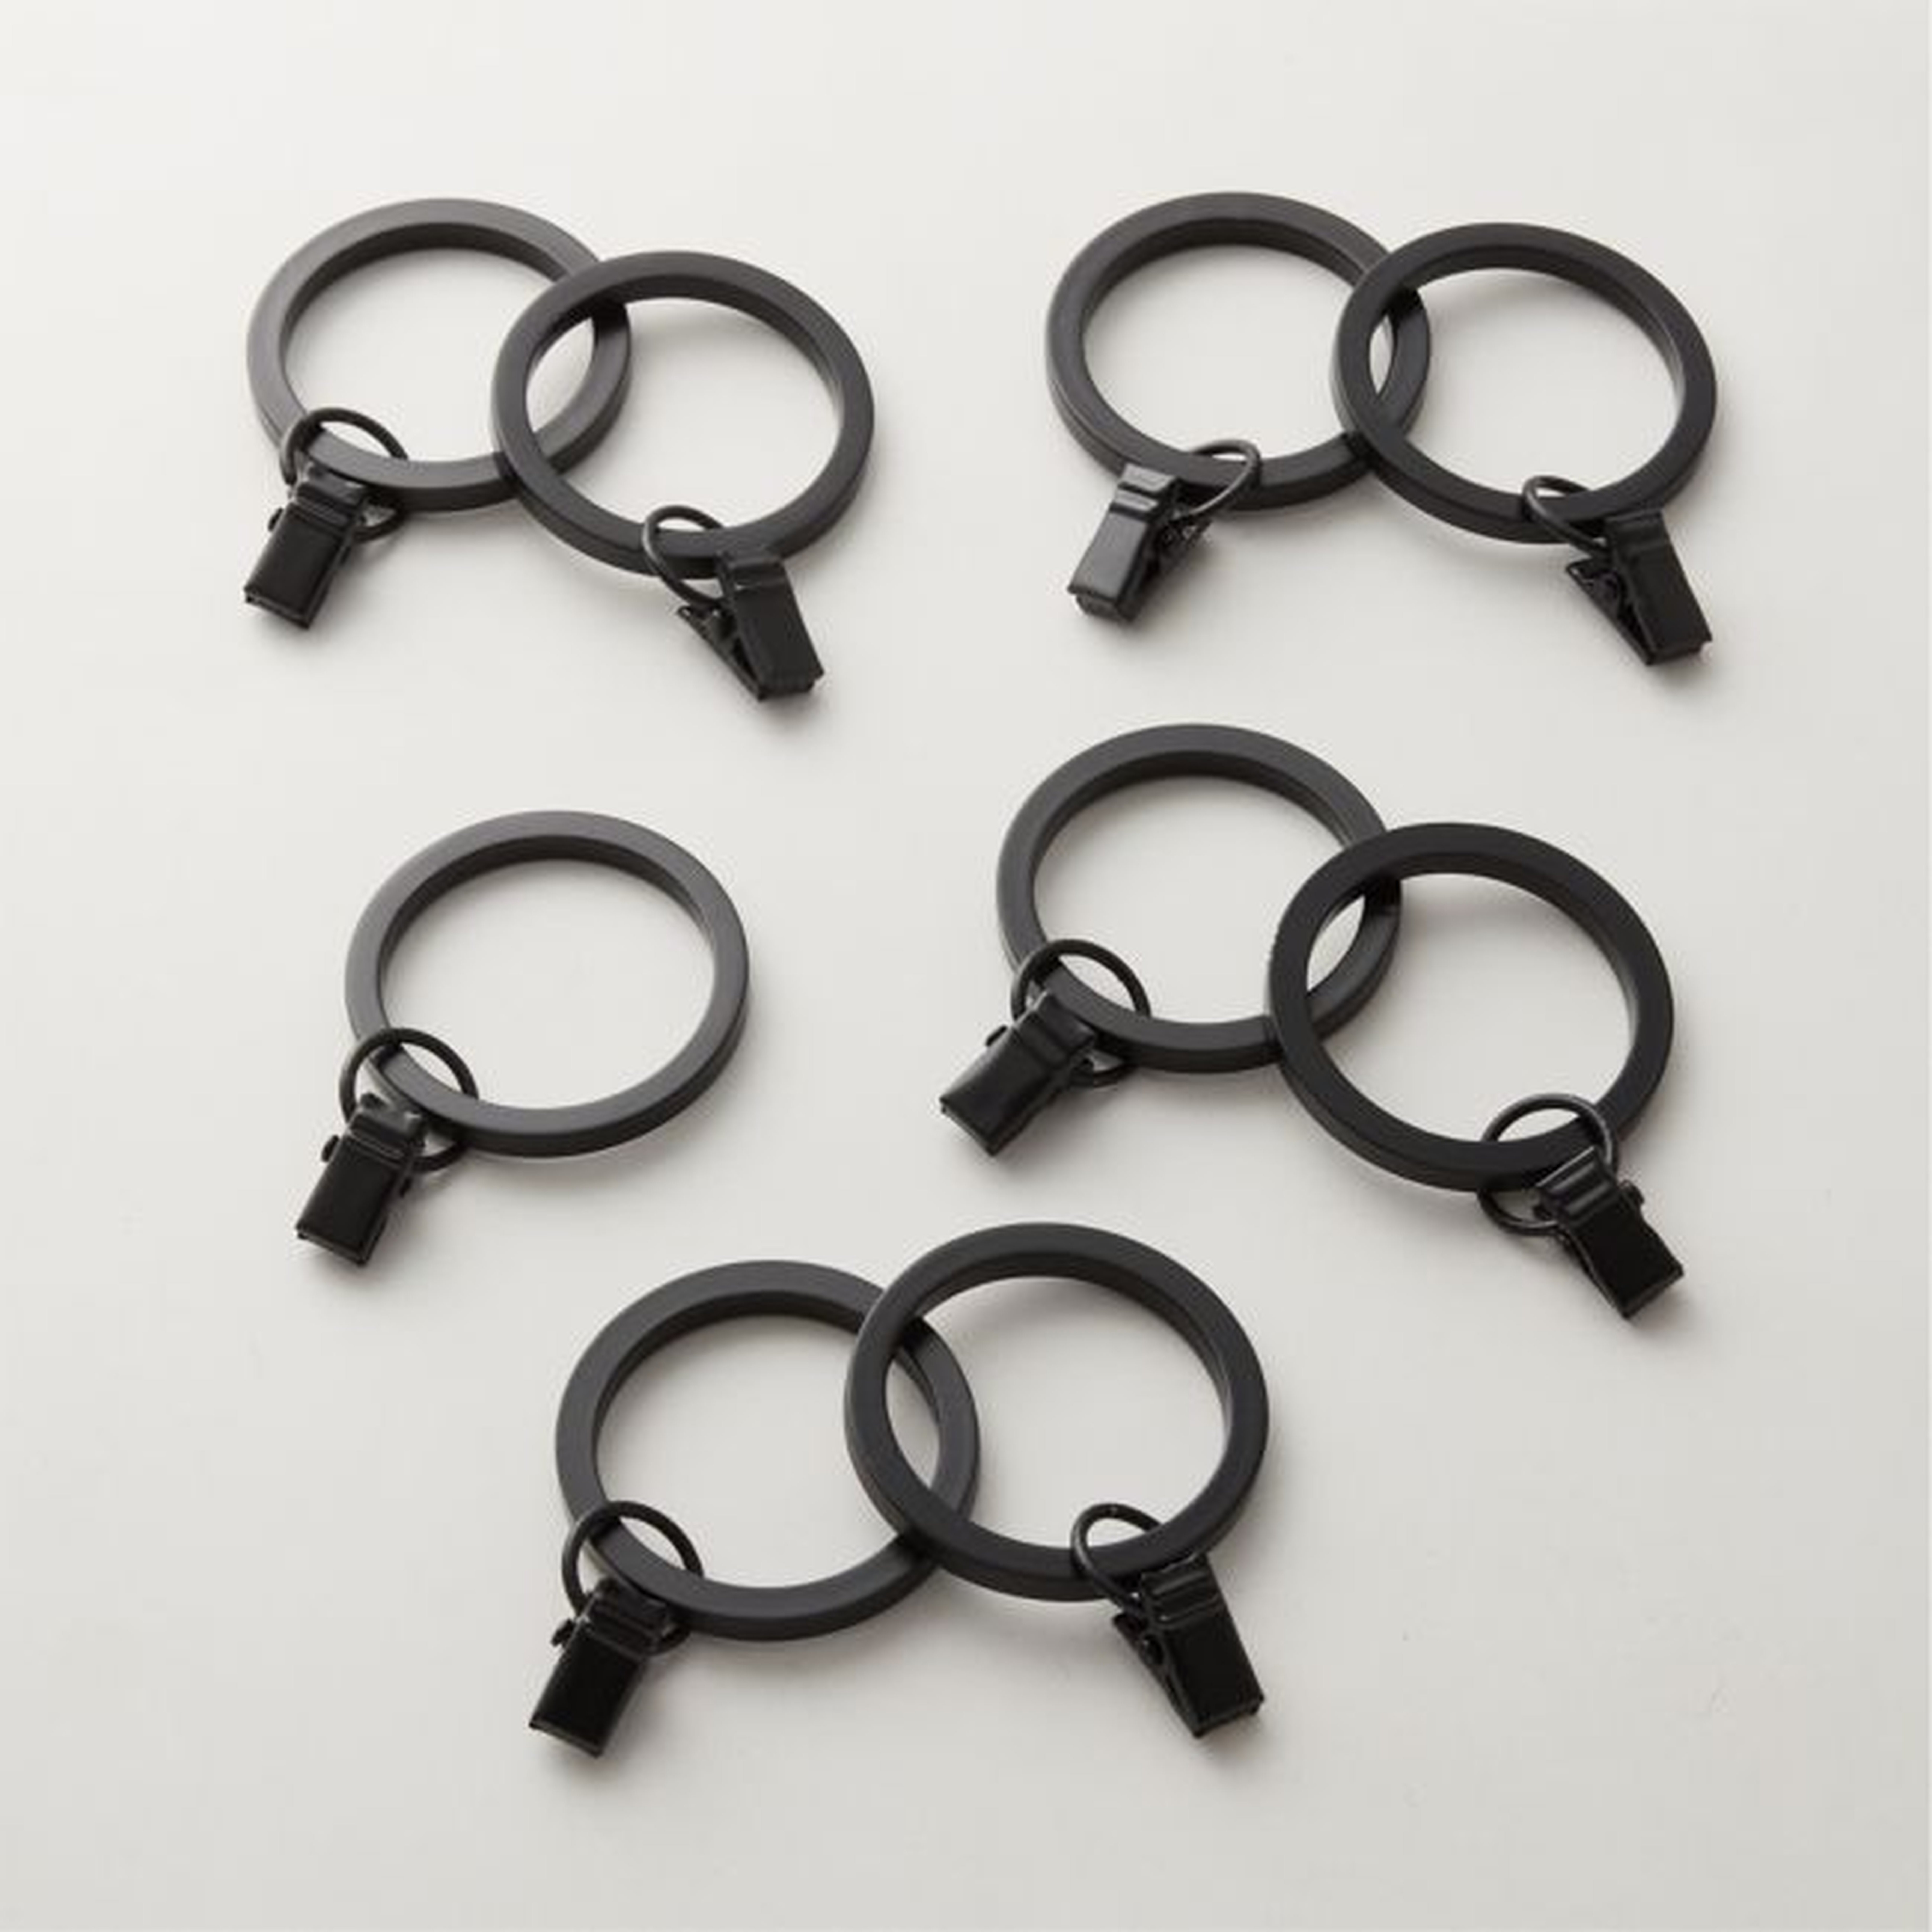 Matte Black Curtain Rings with Clips Set of 9 - CB2